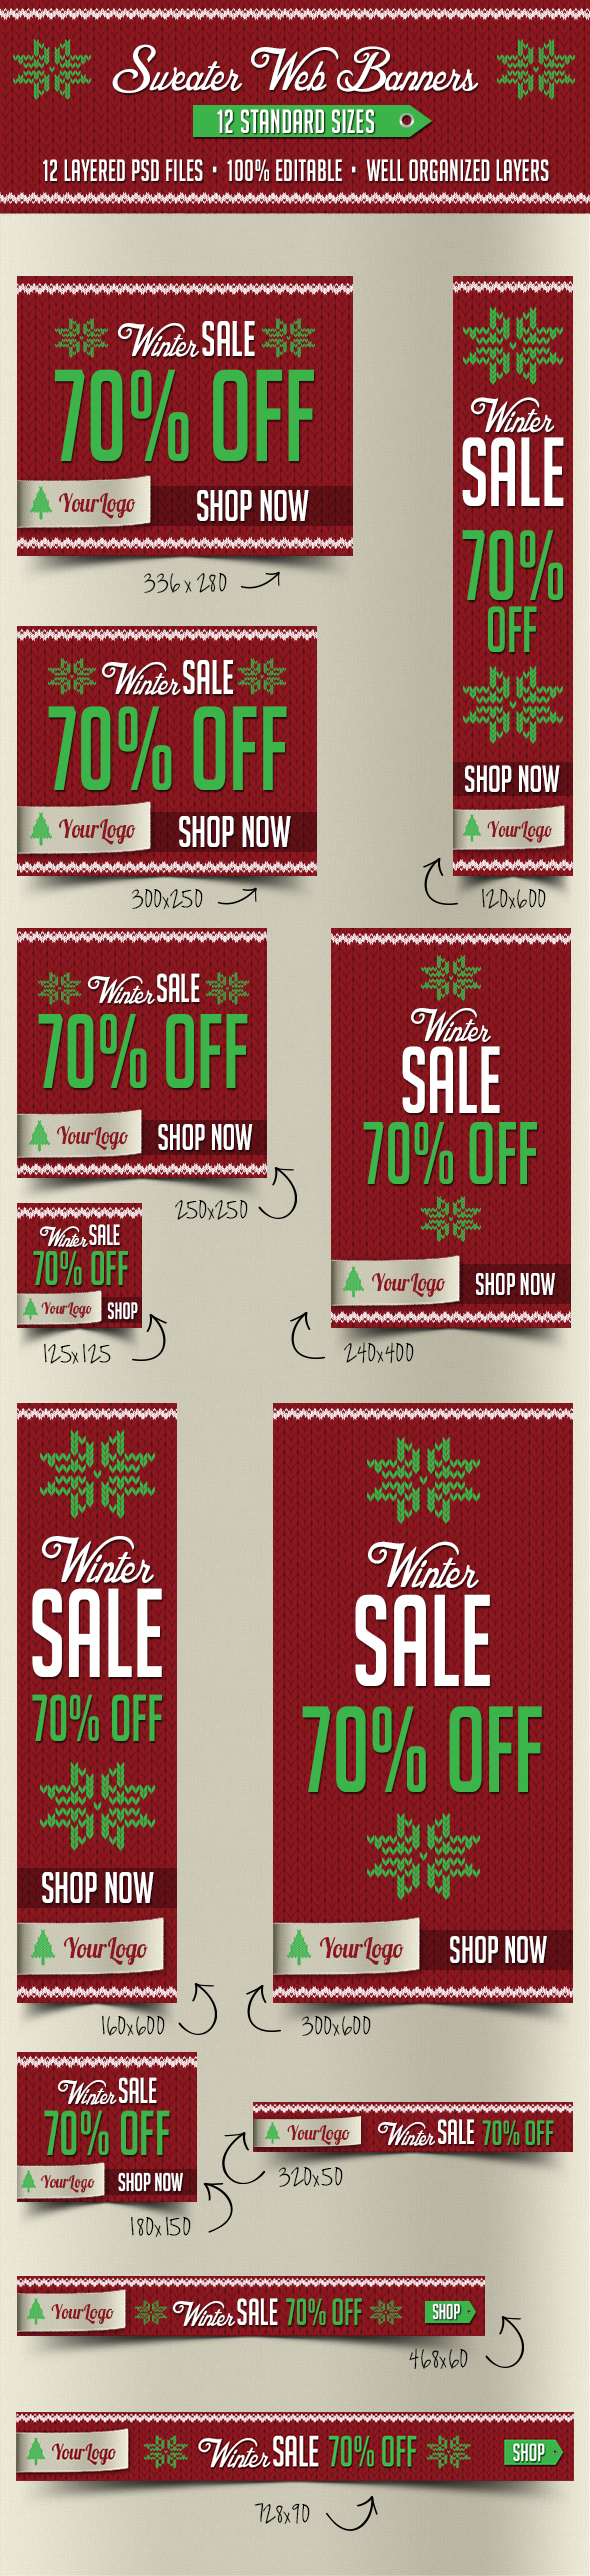 12 Sweater Web Banners